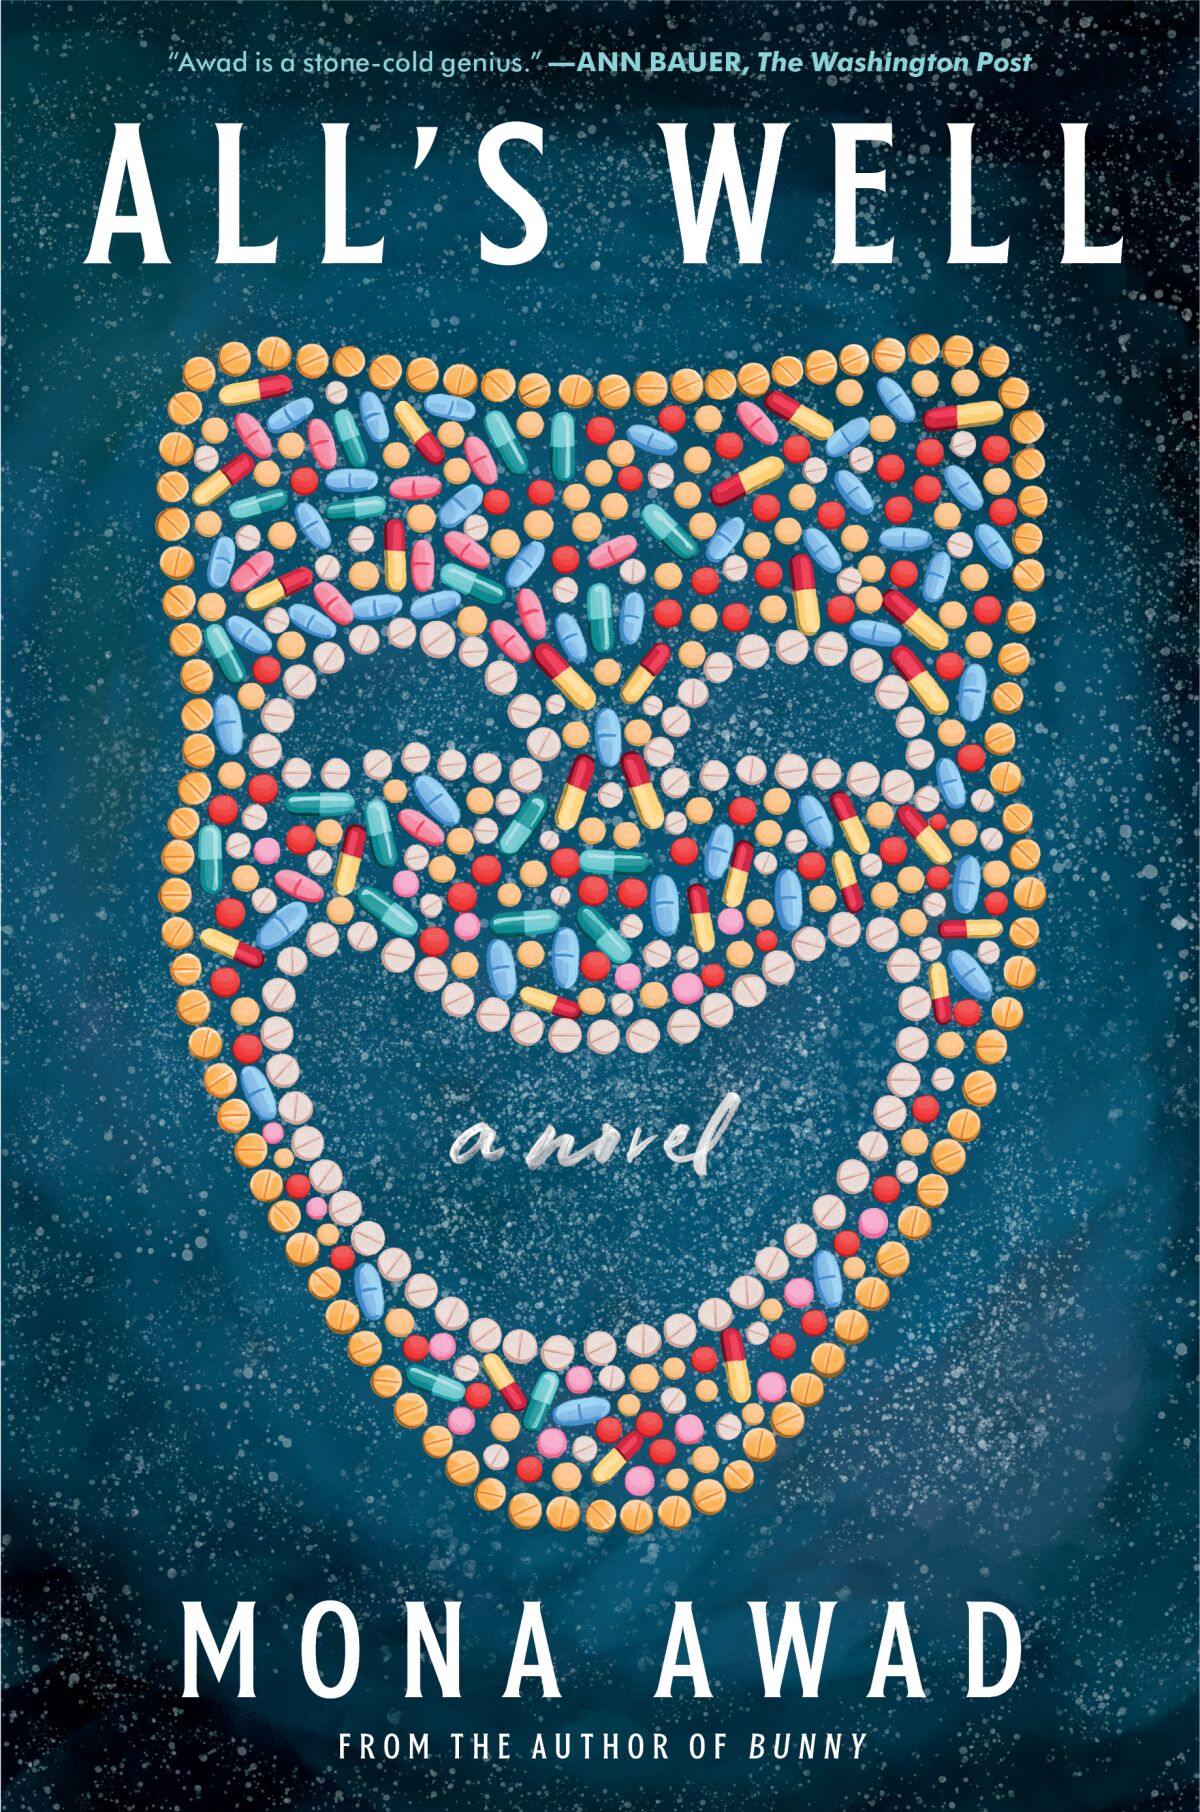 The cover of "All's Well," by Mona Awad, features a traditional comedy mask.